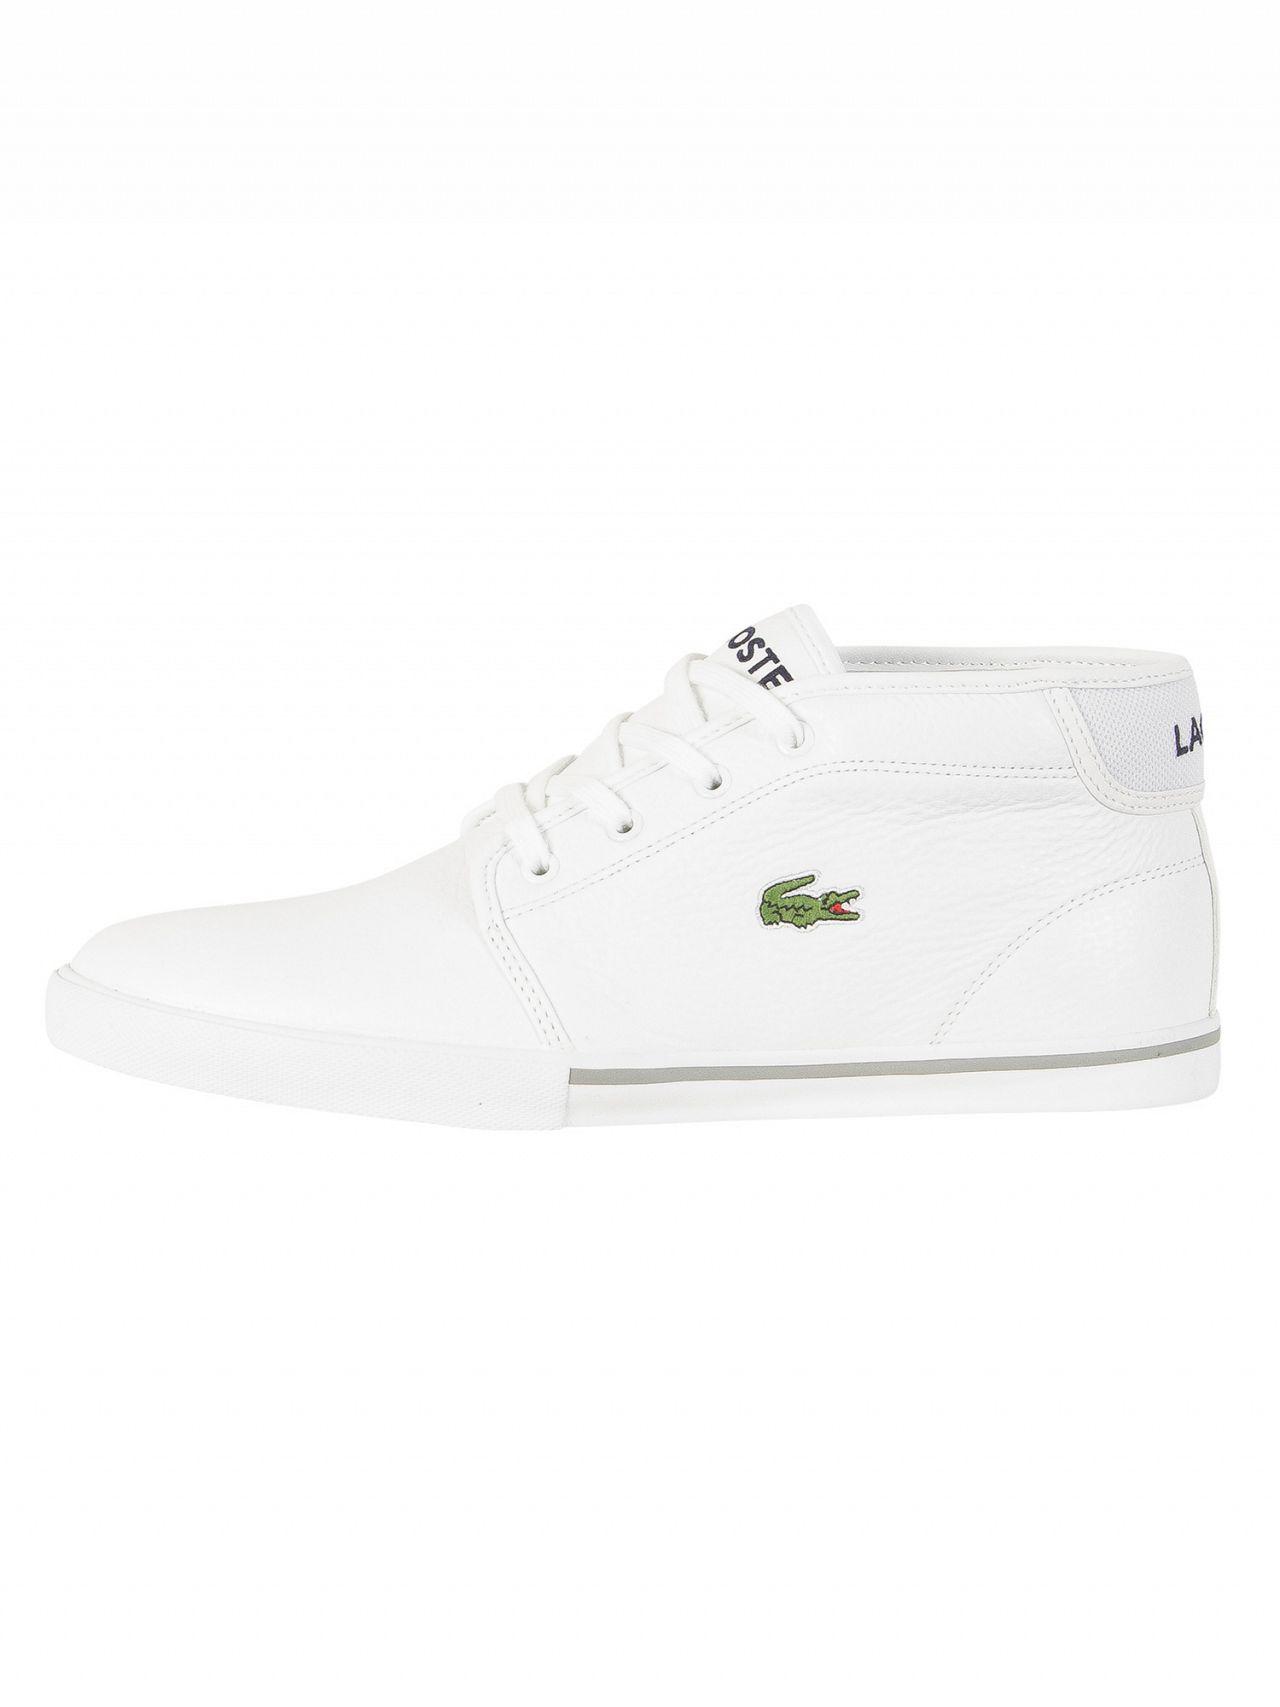 Lacoste Leather Ampthill Trainers in White for Men - Lyst